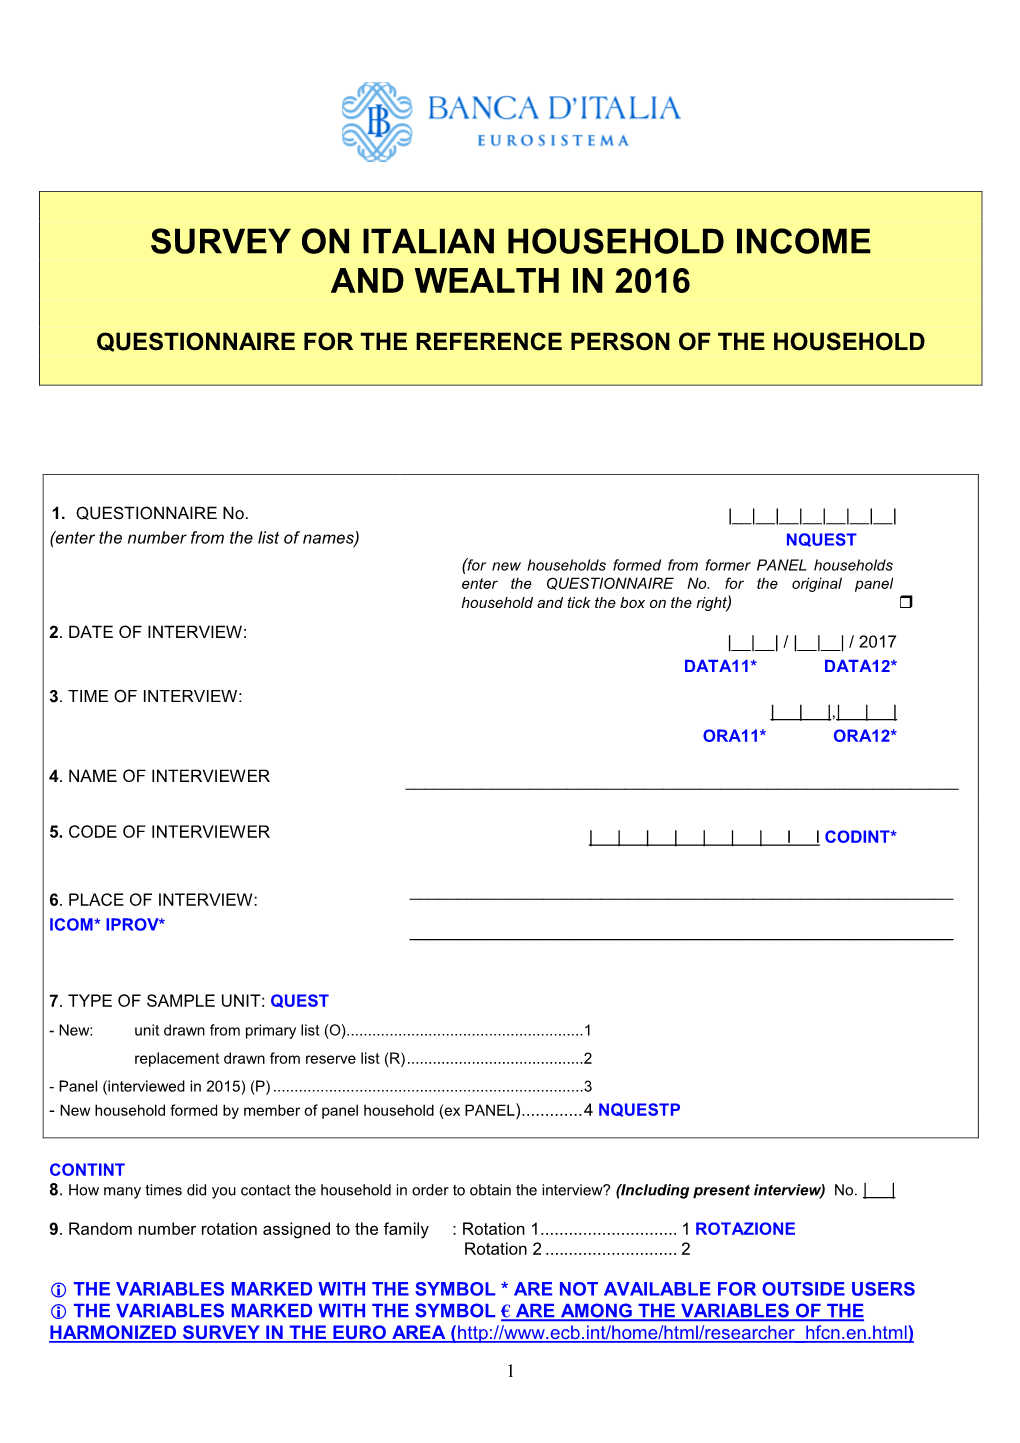 Survey on Italian Household Income and Wealth in 2016